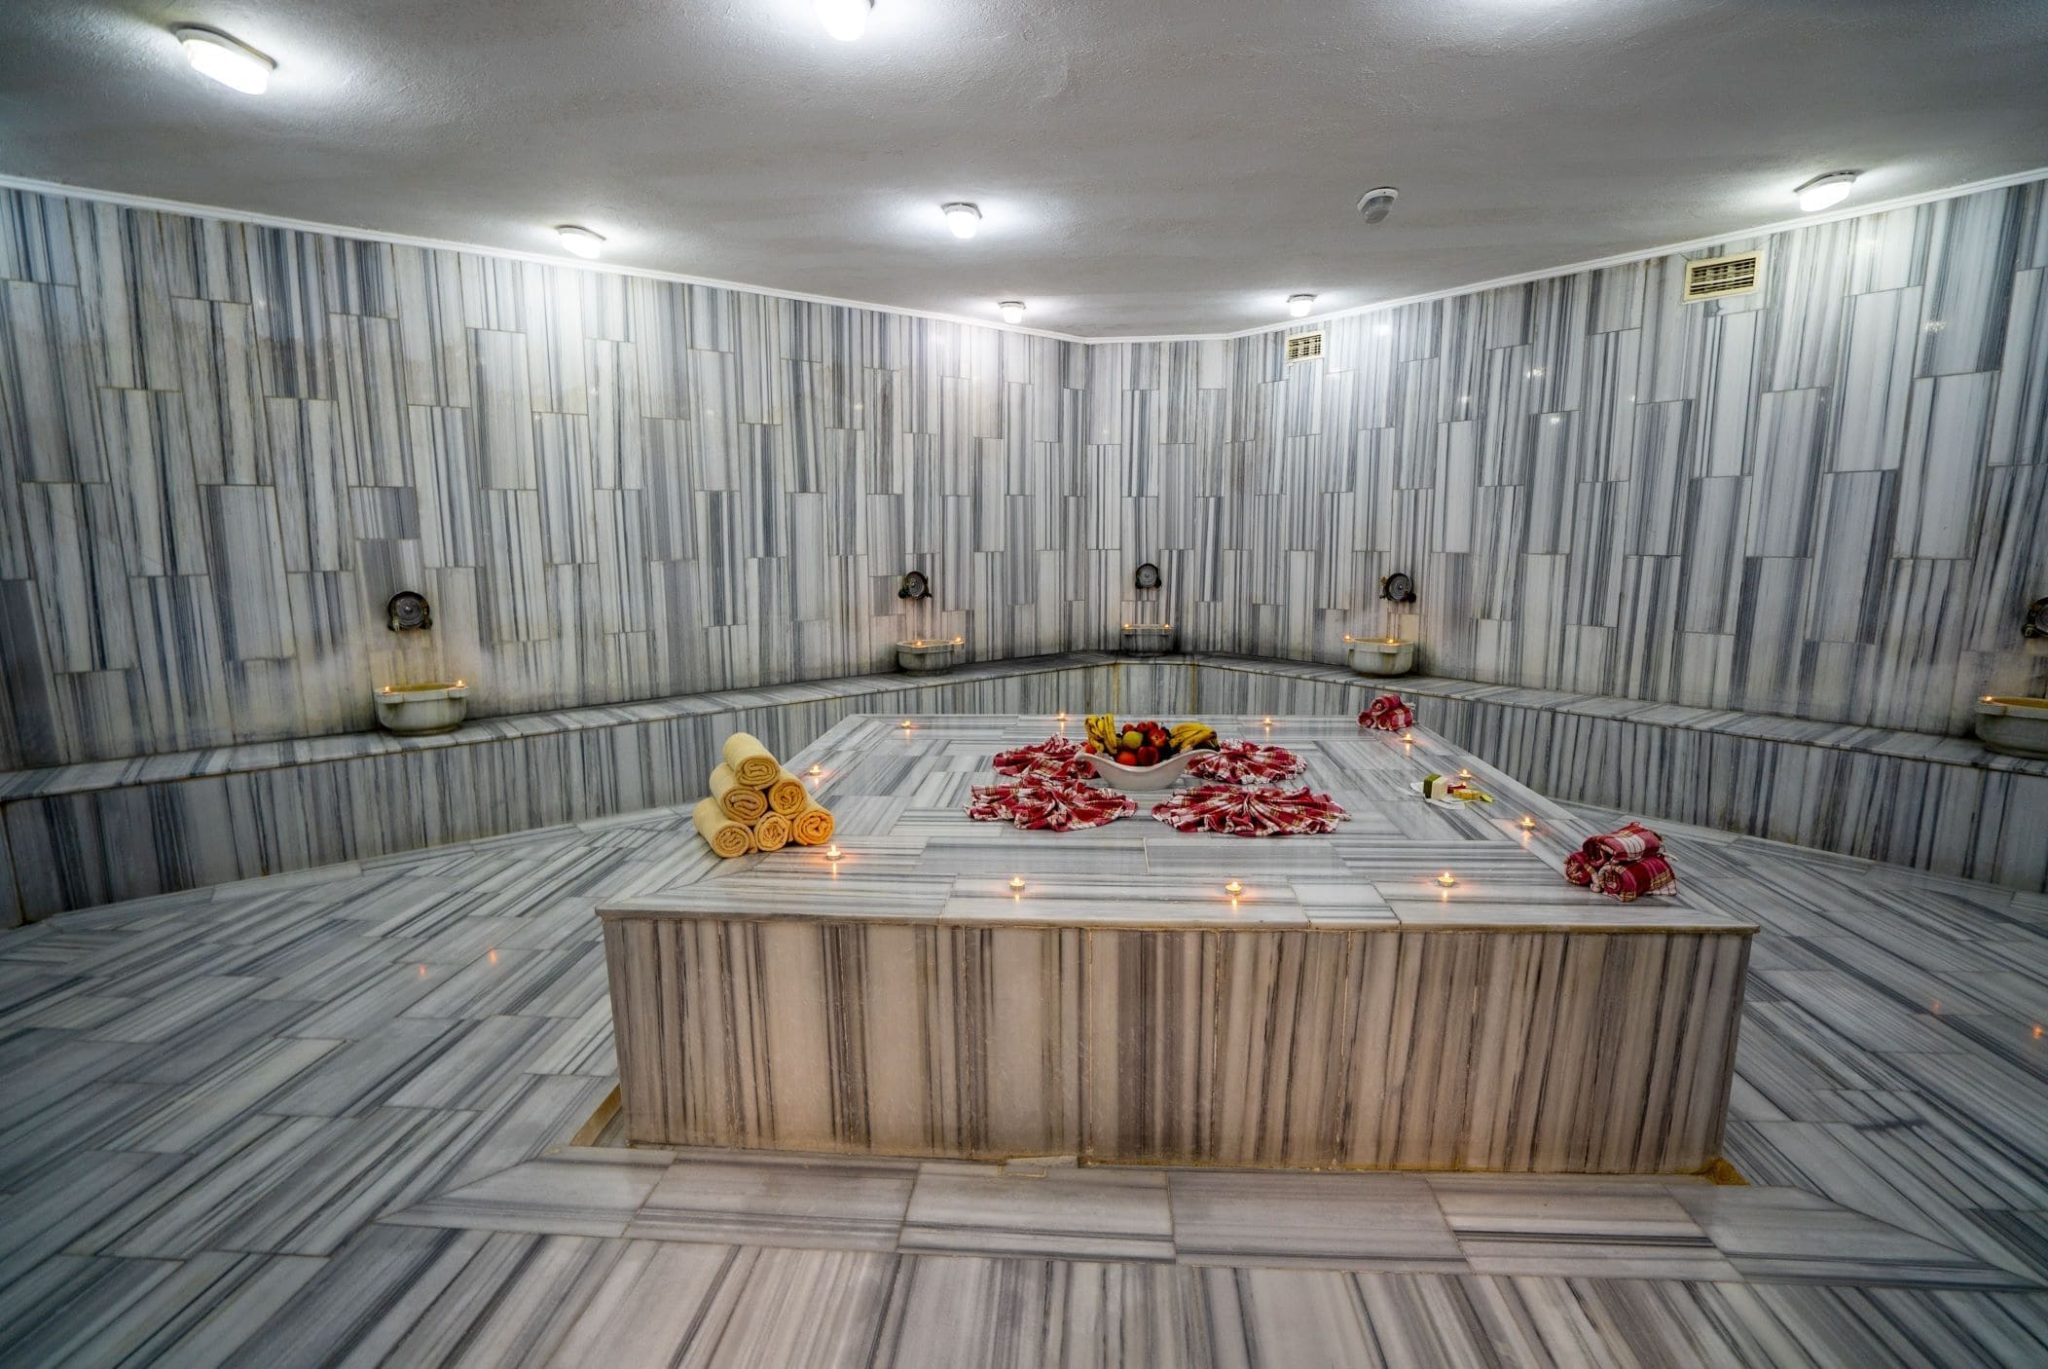 THE BEST GUIDE TO EXPERIENCING AN INCREDIBLE TURKISH BATH